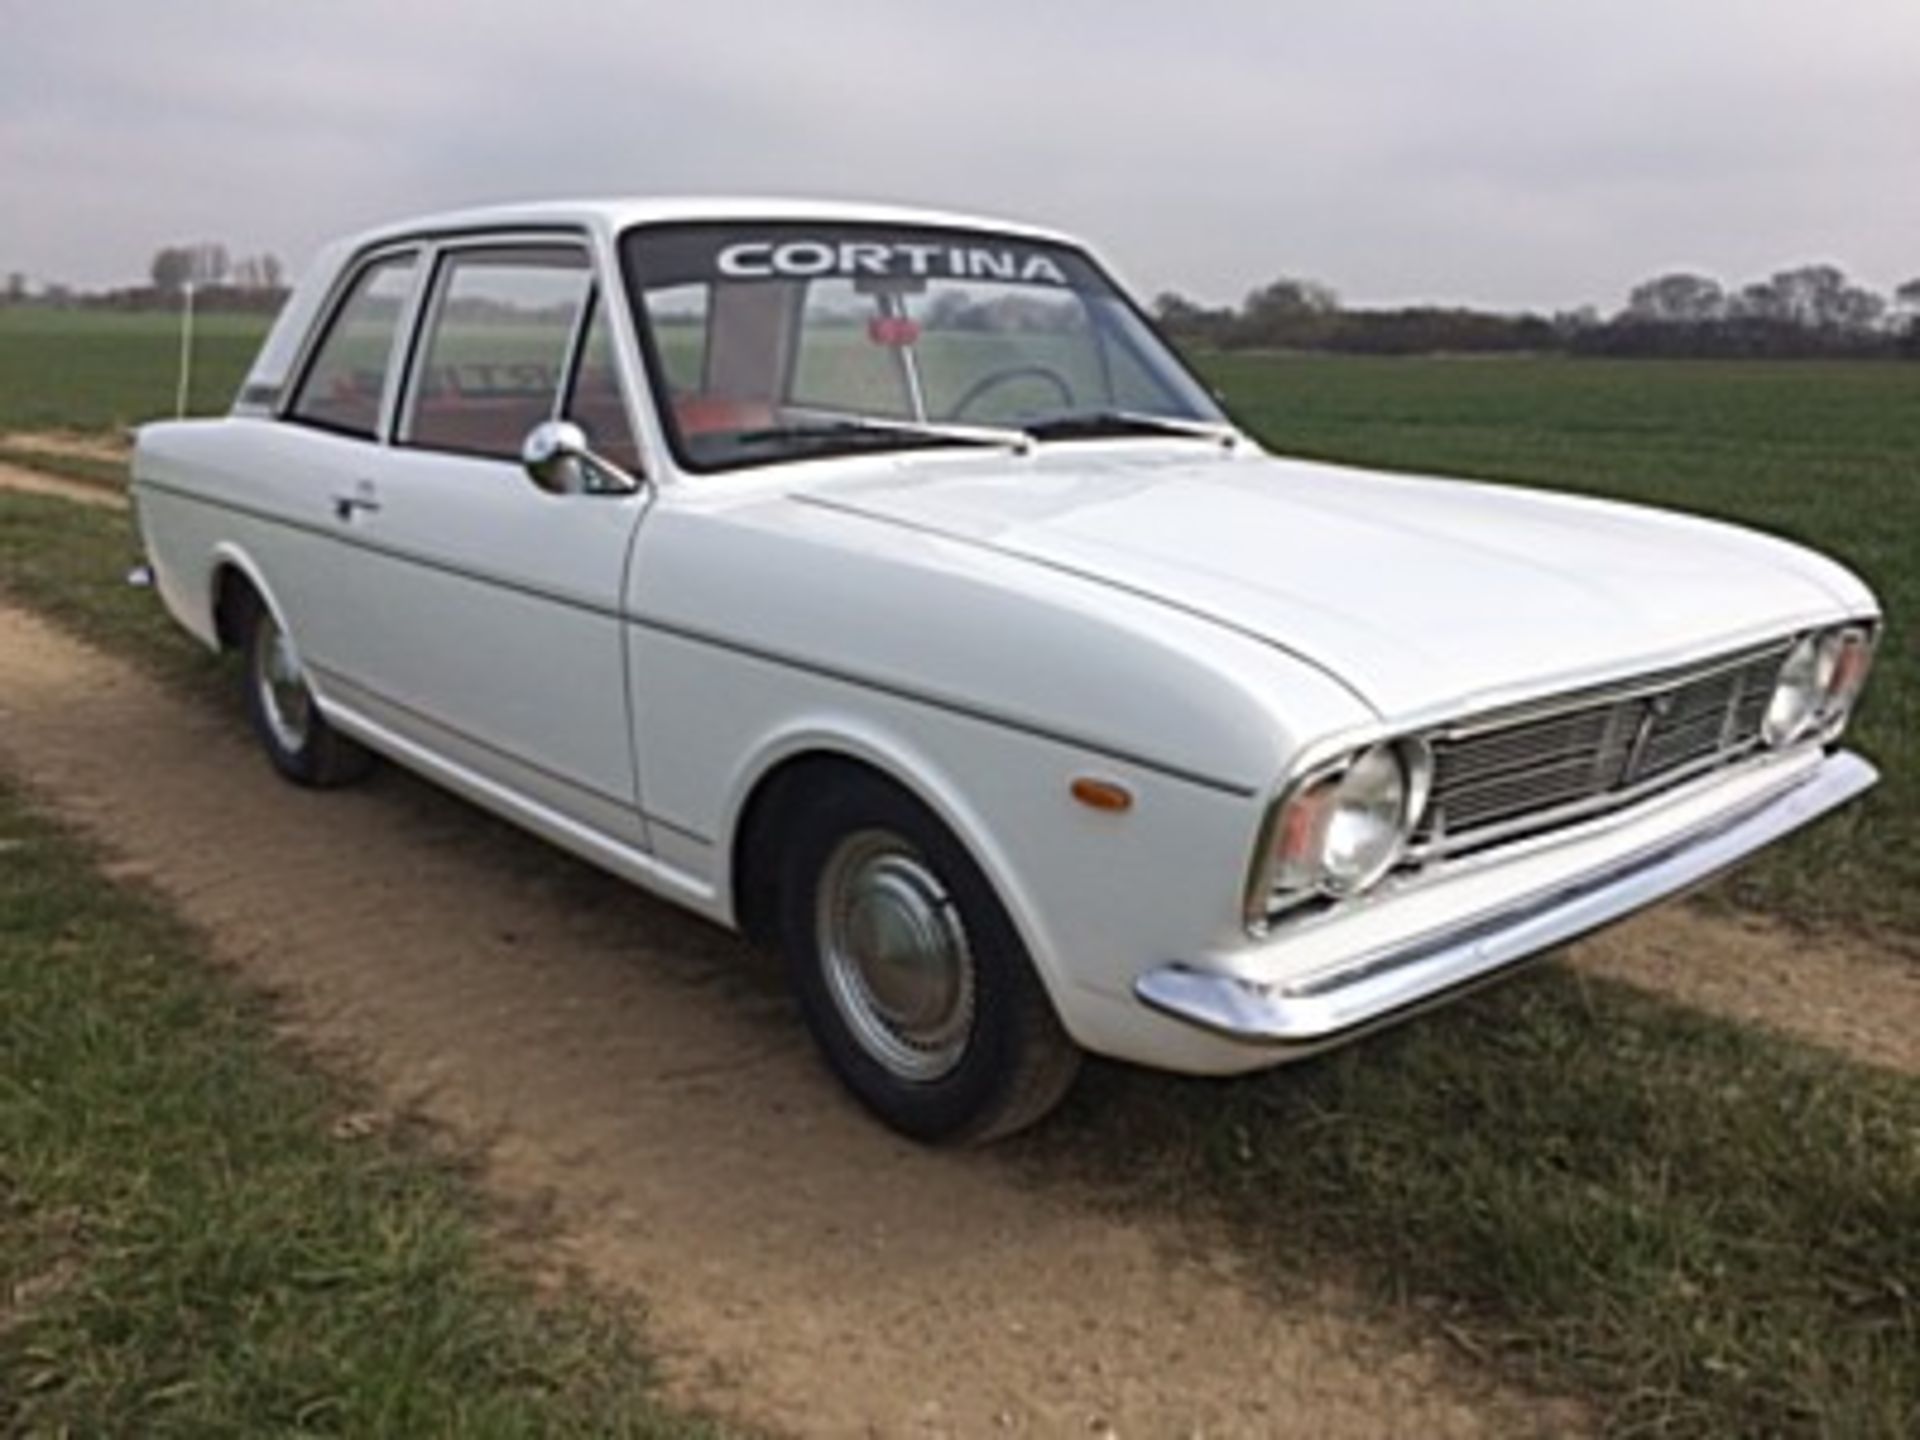 FORD, CORTINA 1300 DELUXE - 1298cc, Chassis number BA92GK90255 - the vendor informs us that this